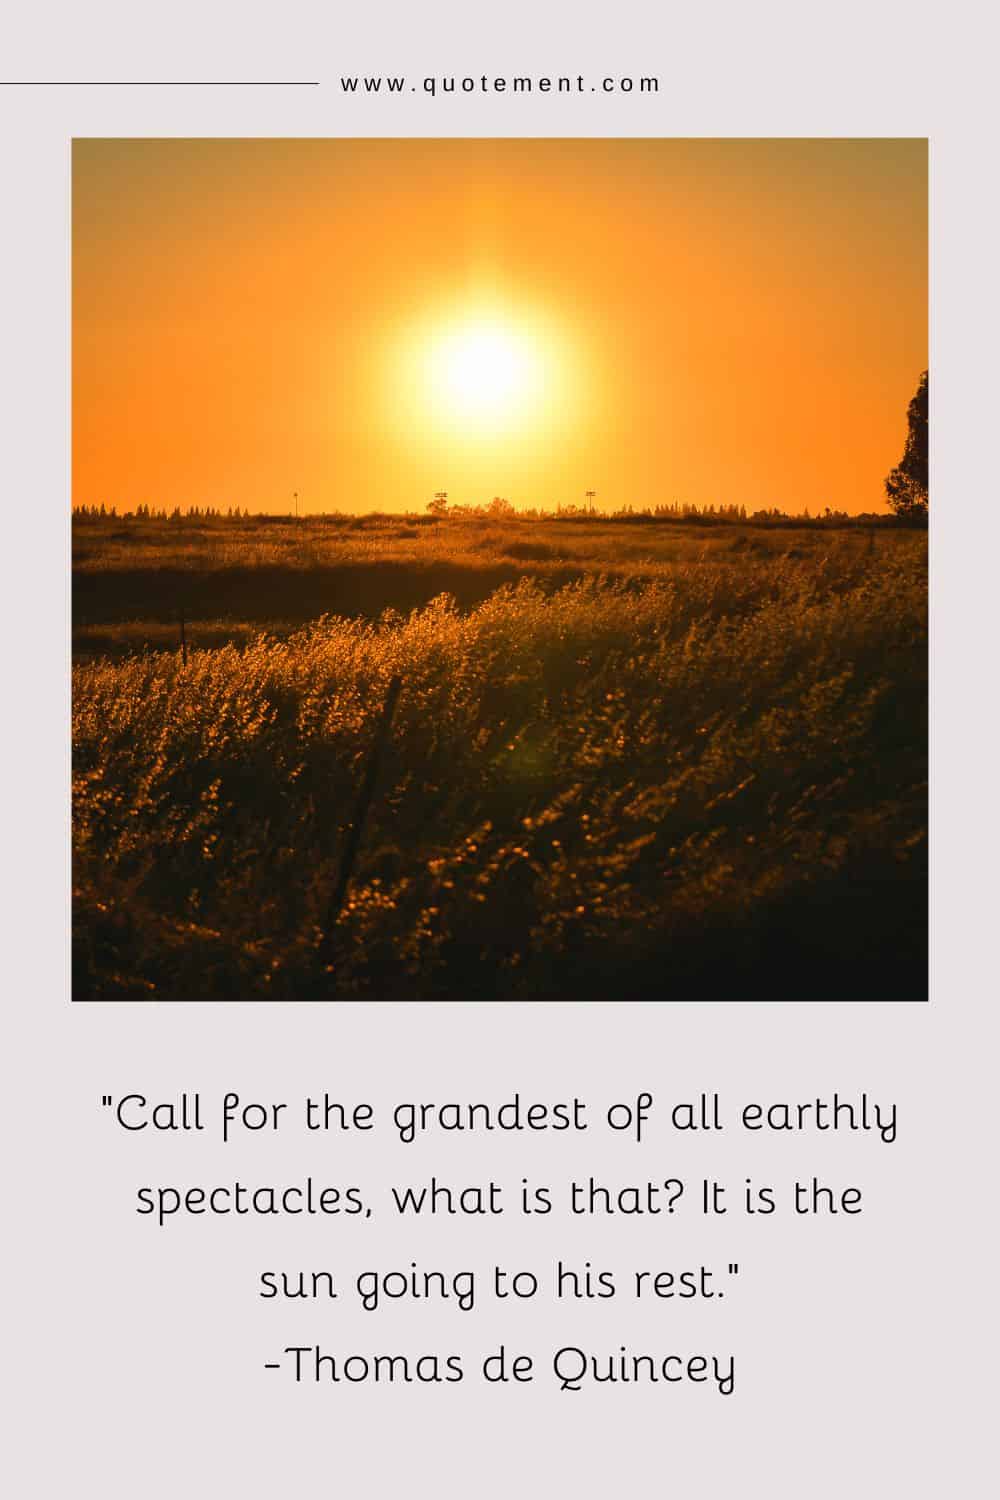 Call for the grandest of all earthly spectacles, what is that It is the sun going to his rest